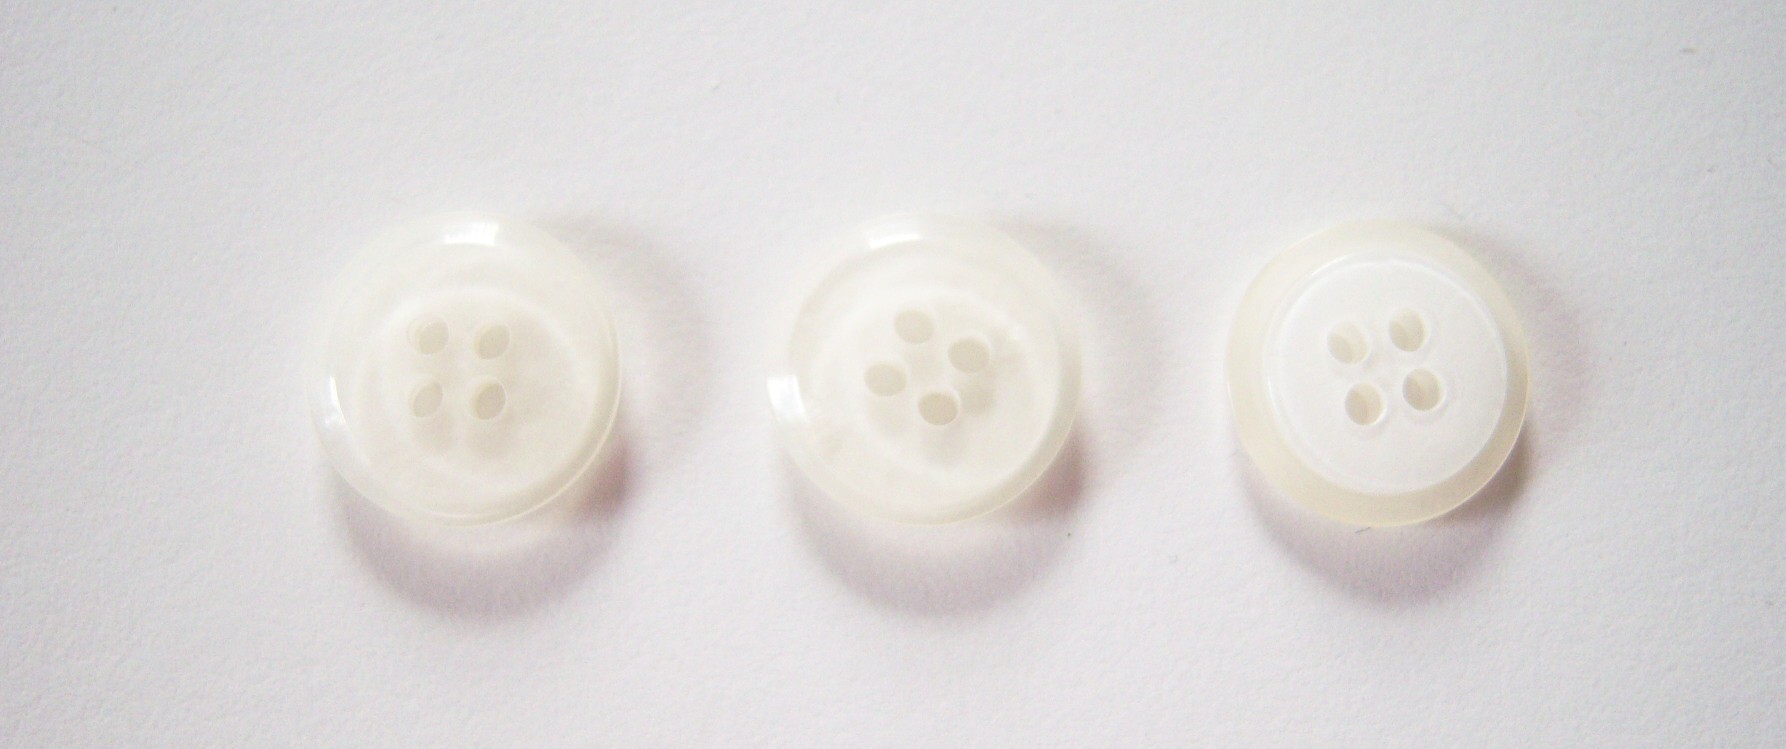 Off White Pearlized 5/8" 4 Hole Button